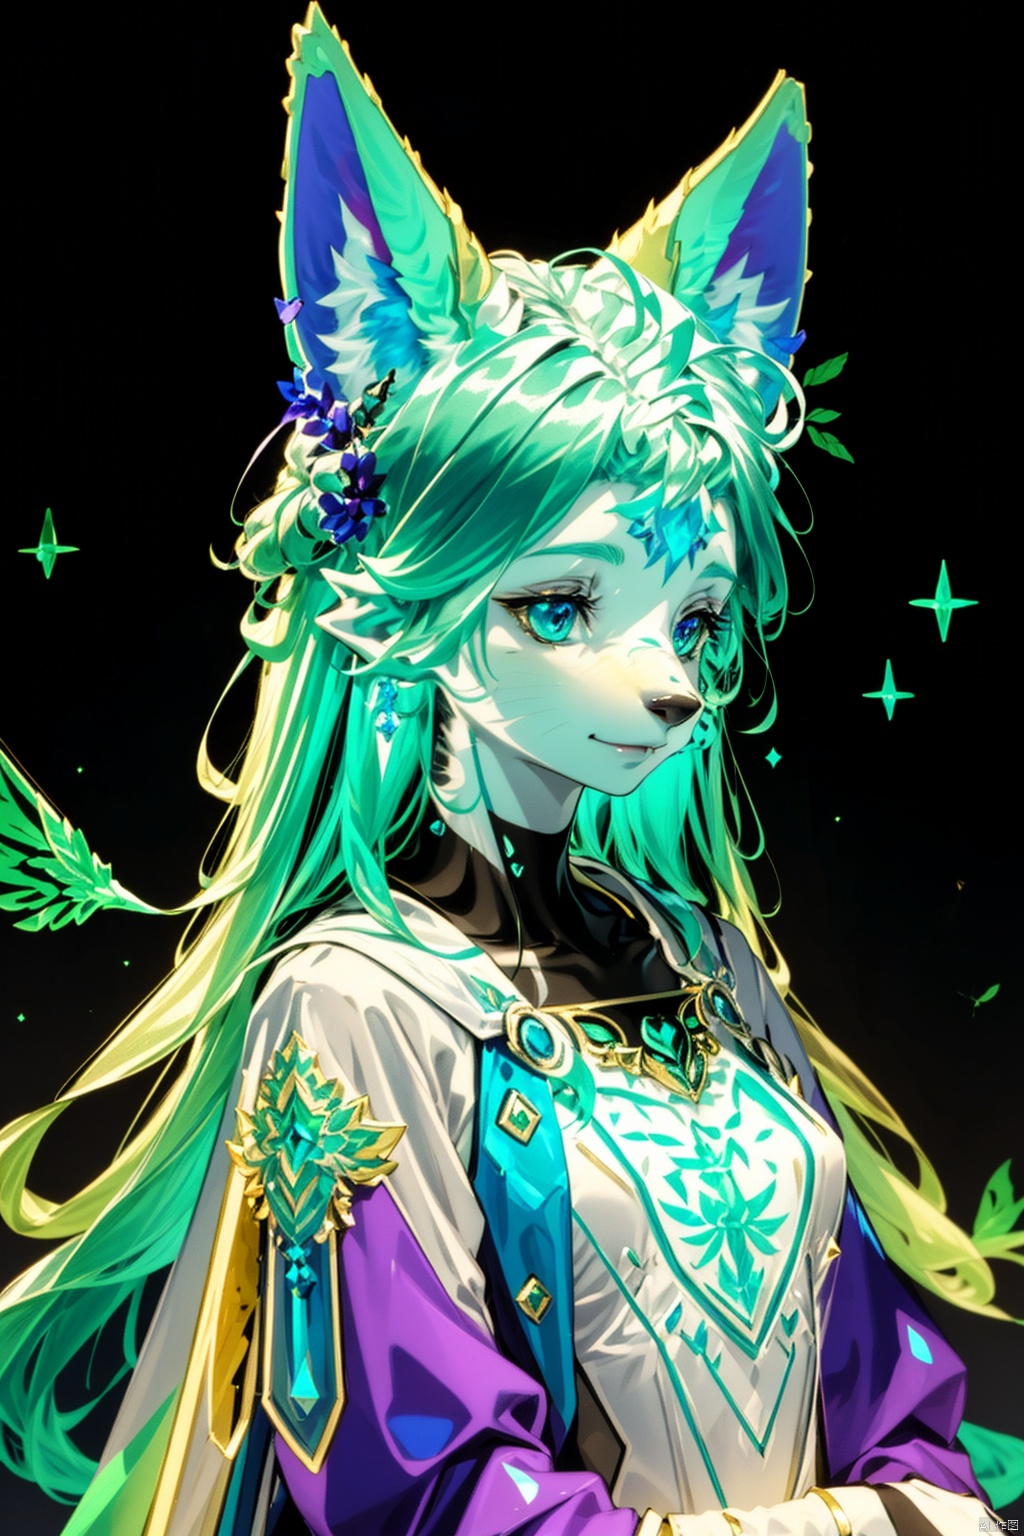  half furry,animal ears,furry:1.3, extremely delicate iridiscent a woman made of Translucent glowing glass, translucent, tiny golden accents, beautifully and intricately detailed, ethereal glow, whimsical, art by Mschiffer, best quality, glass art, magical holographic glow, half furry, FURRY,simple background,in the dark,